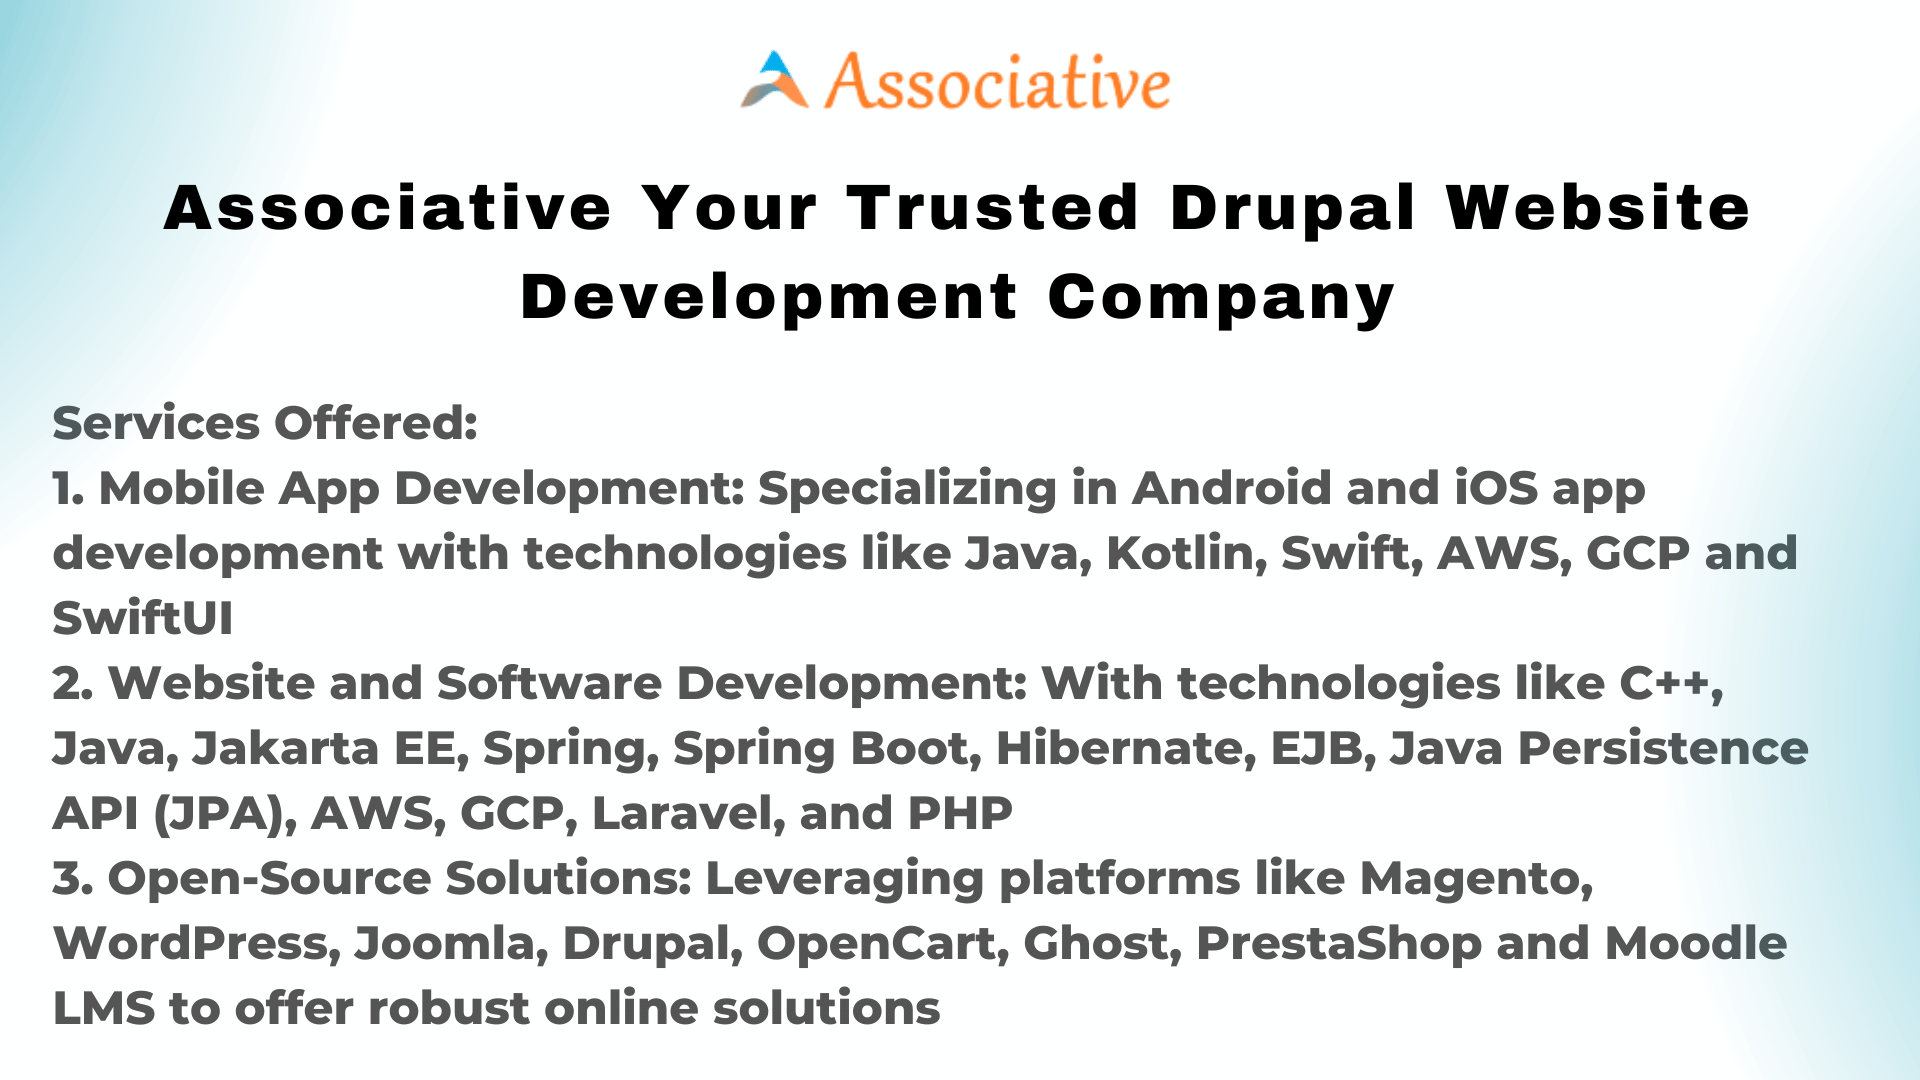 Associative Your Trusted Drupal Website Development Company in India